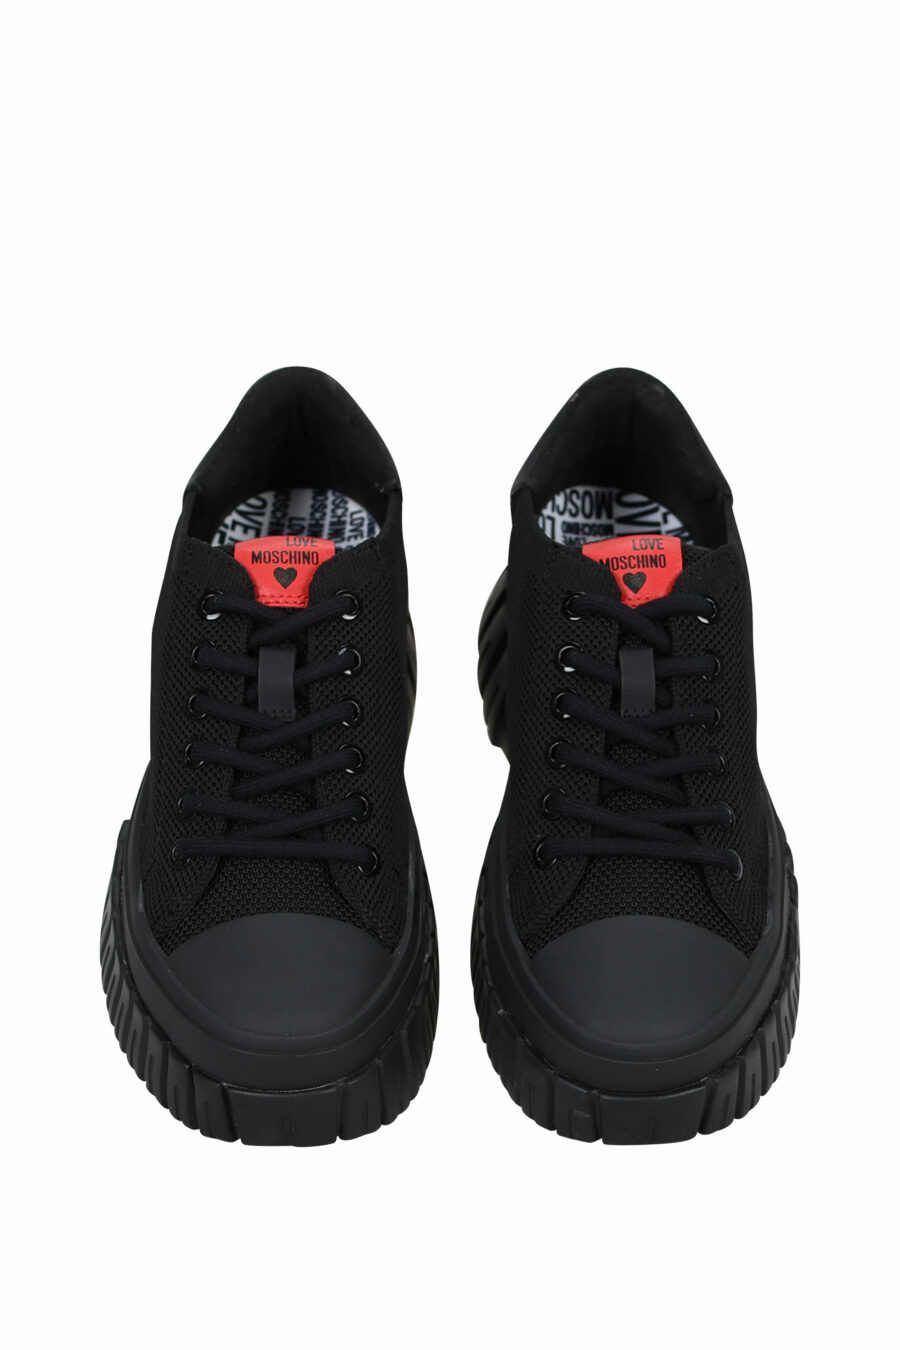 Black mix trainers with logo - 8054653167971 4